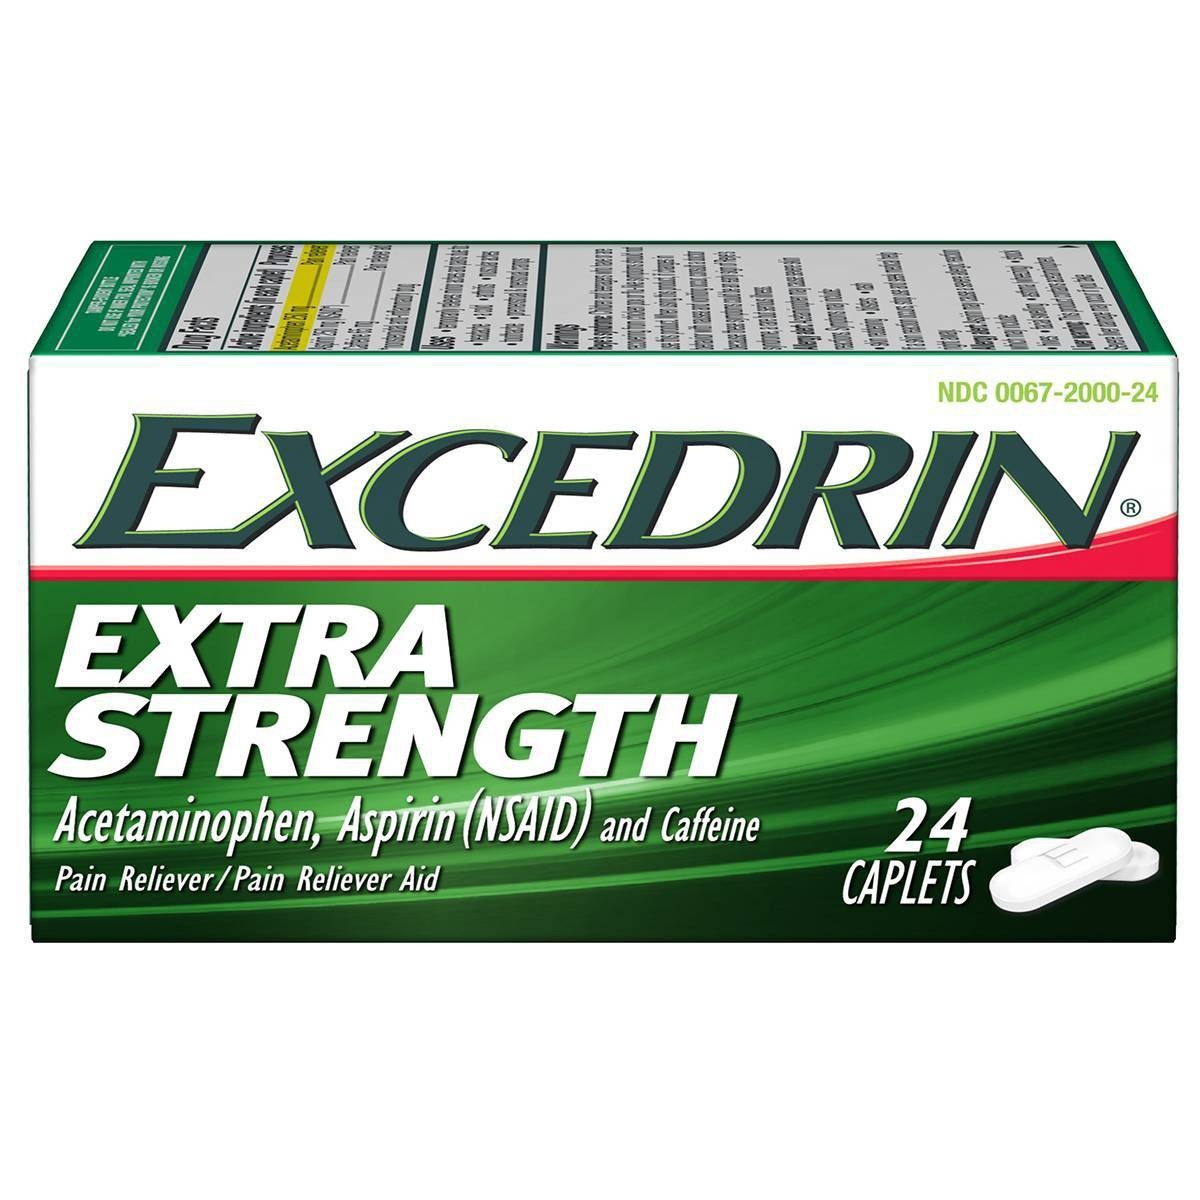 slide 1 of 5, Excedrin Extra Strength Pain Reliever / Pain Reliever Aid Caplets, 24 ct